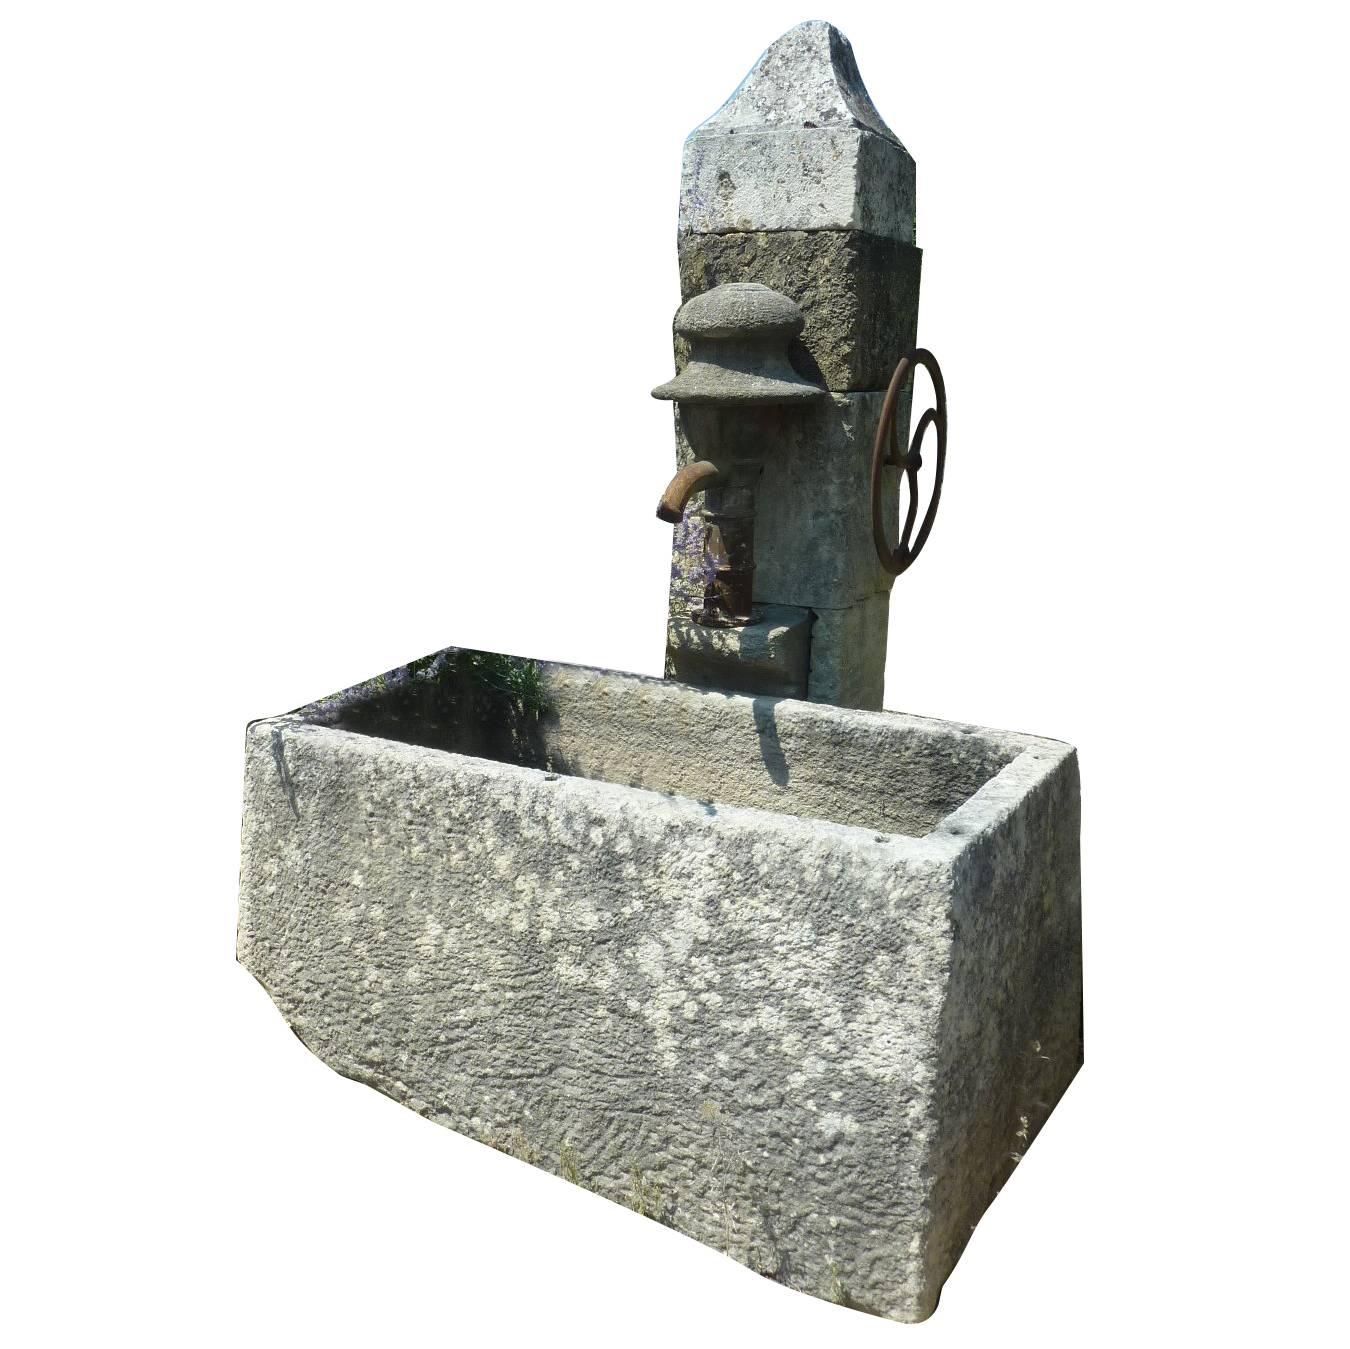 Antique Wall-Fountain with Ancient Manual Water Pump and Monolith Stone Basin For Sale